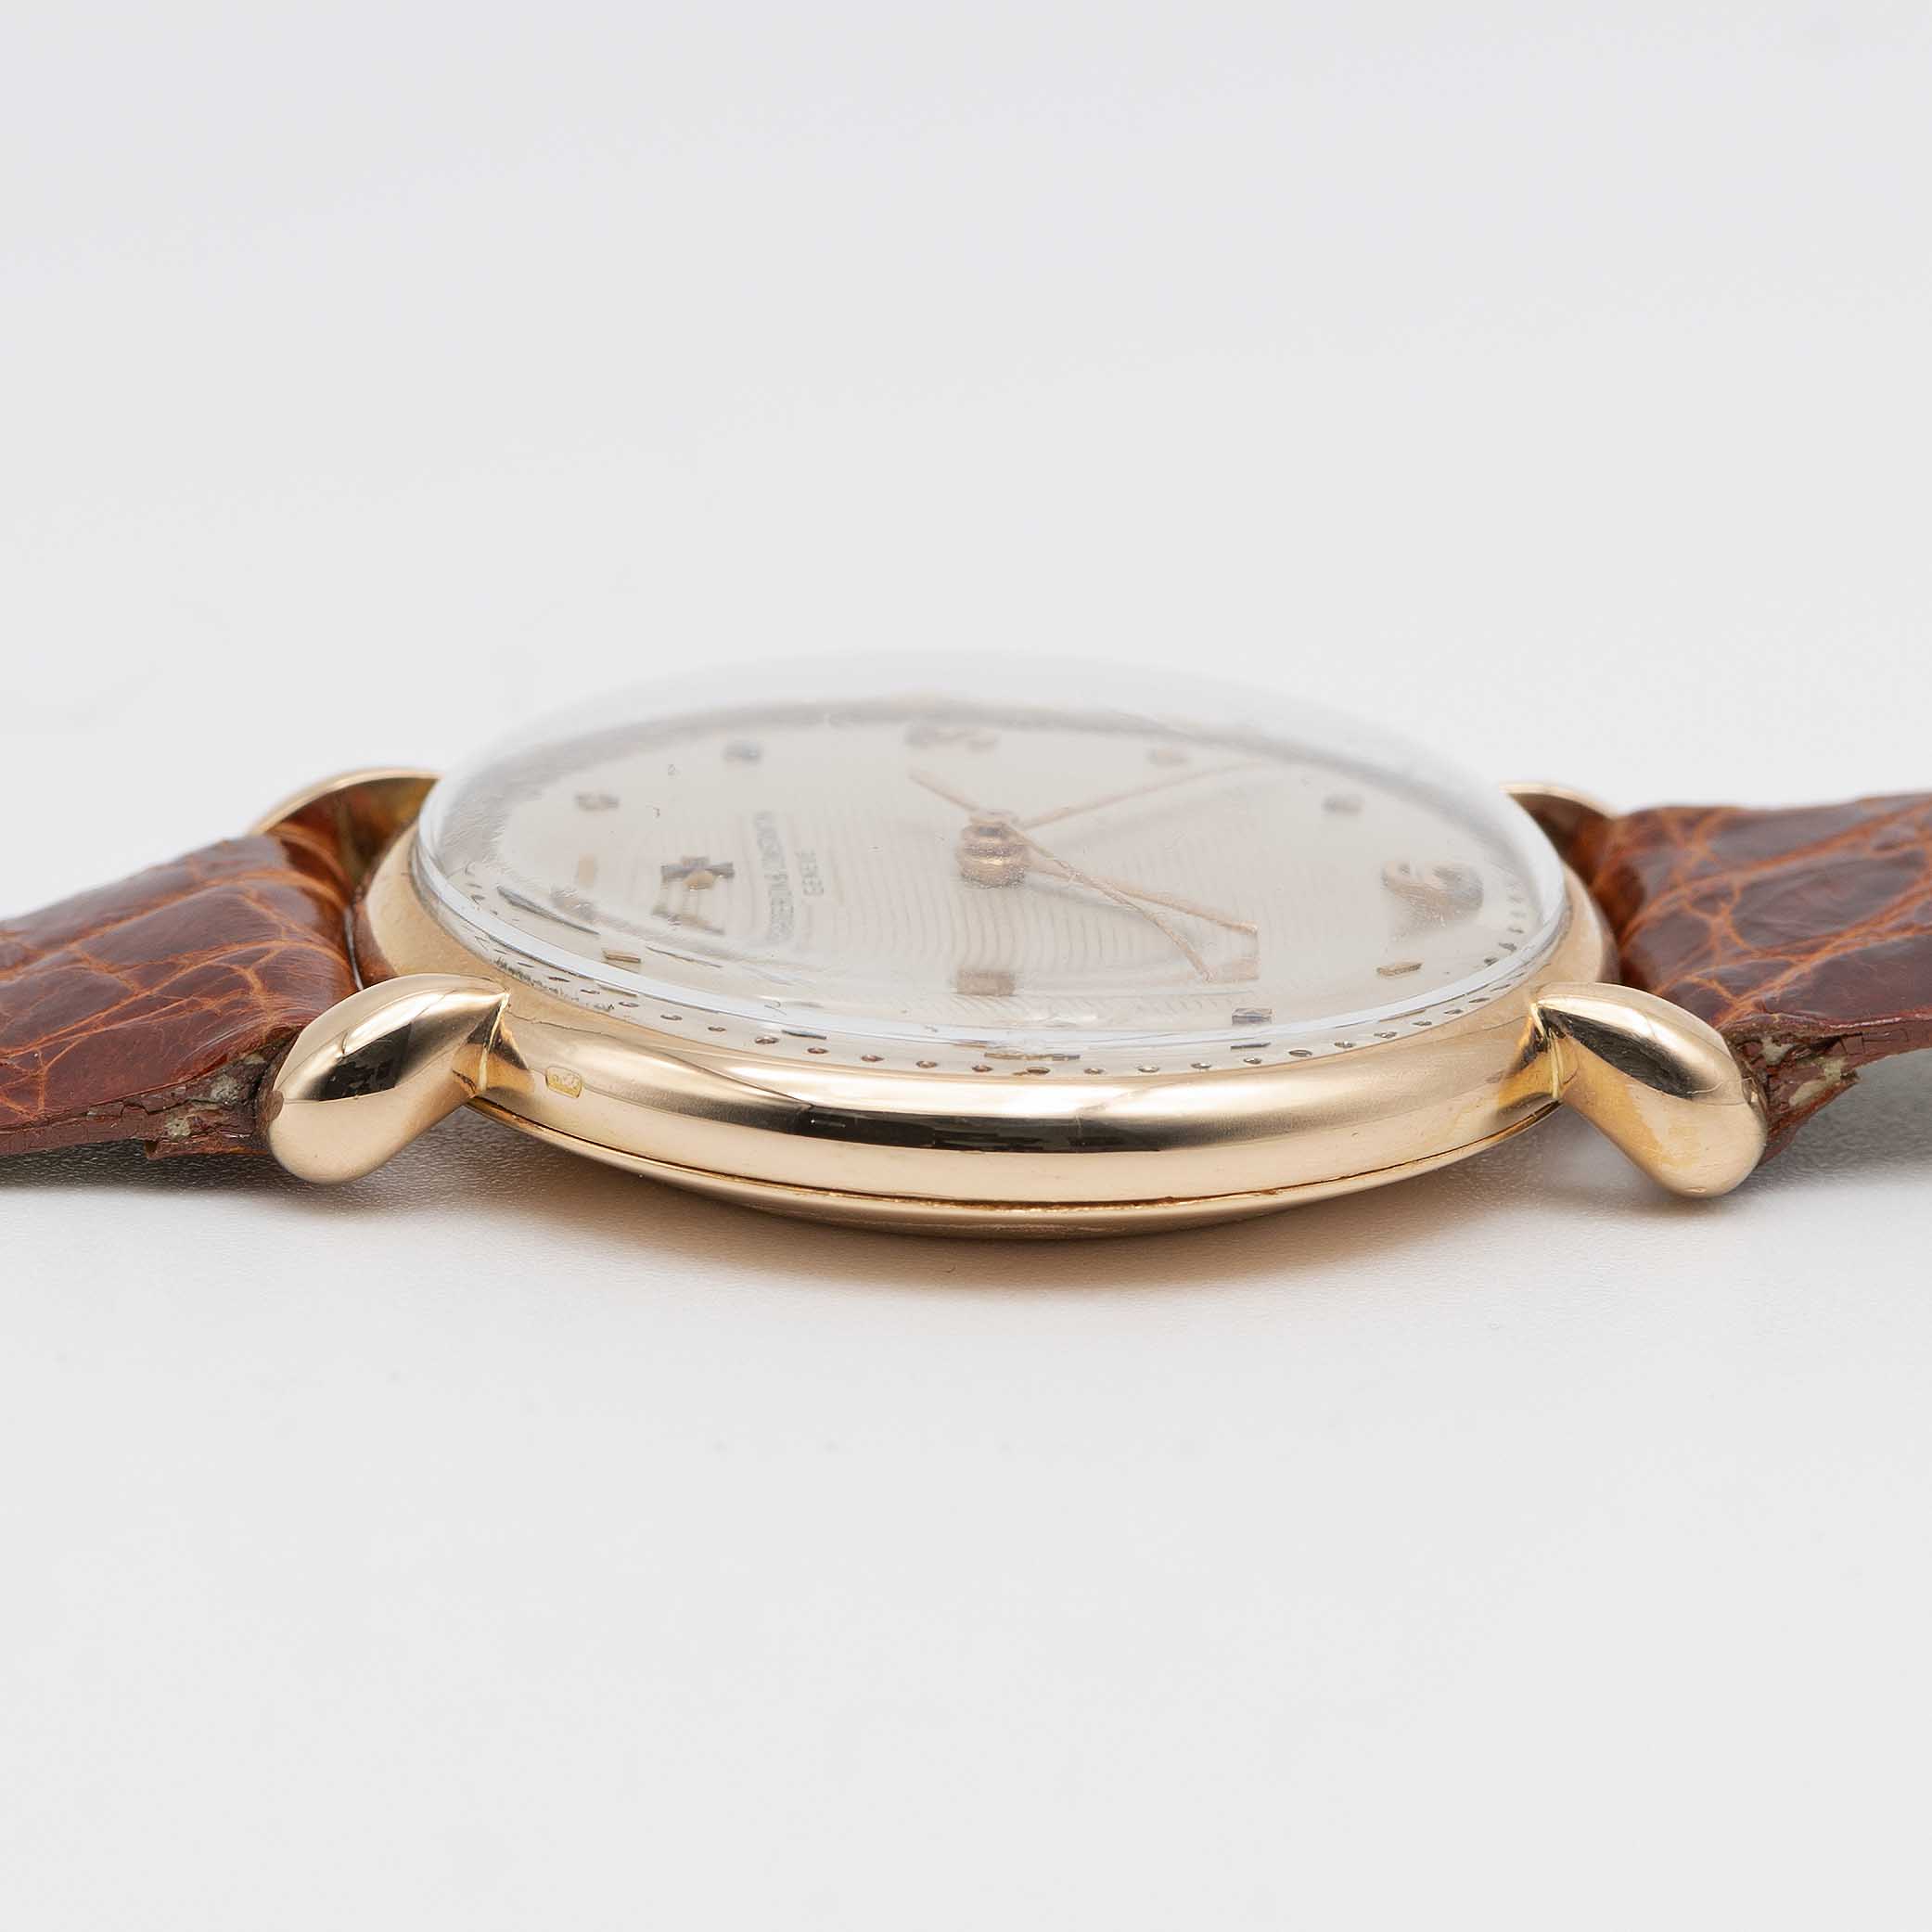 A GENTLEMAN'S 18K SOLID ROSE GOLD VACHERON & CONSTANTIN WRIST WATCH CIRCA 1950s, WITH GUILLOCHE DIAL - Image 8 of 8